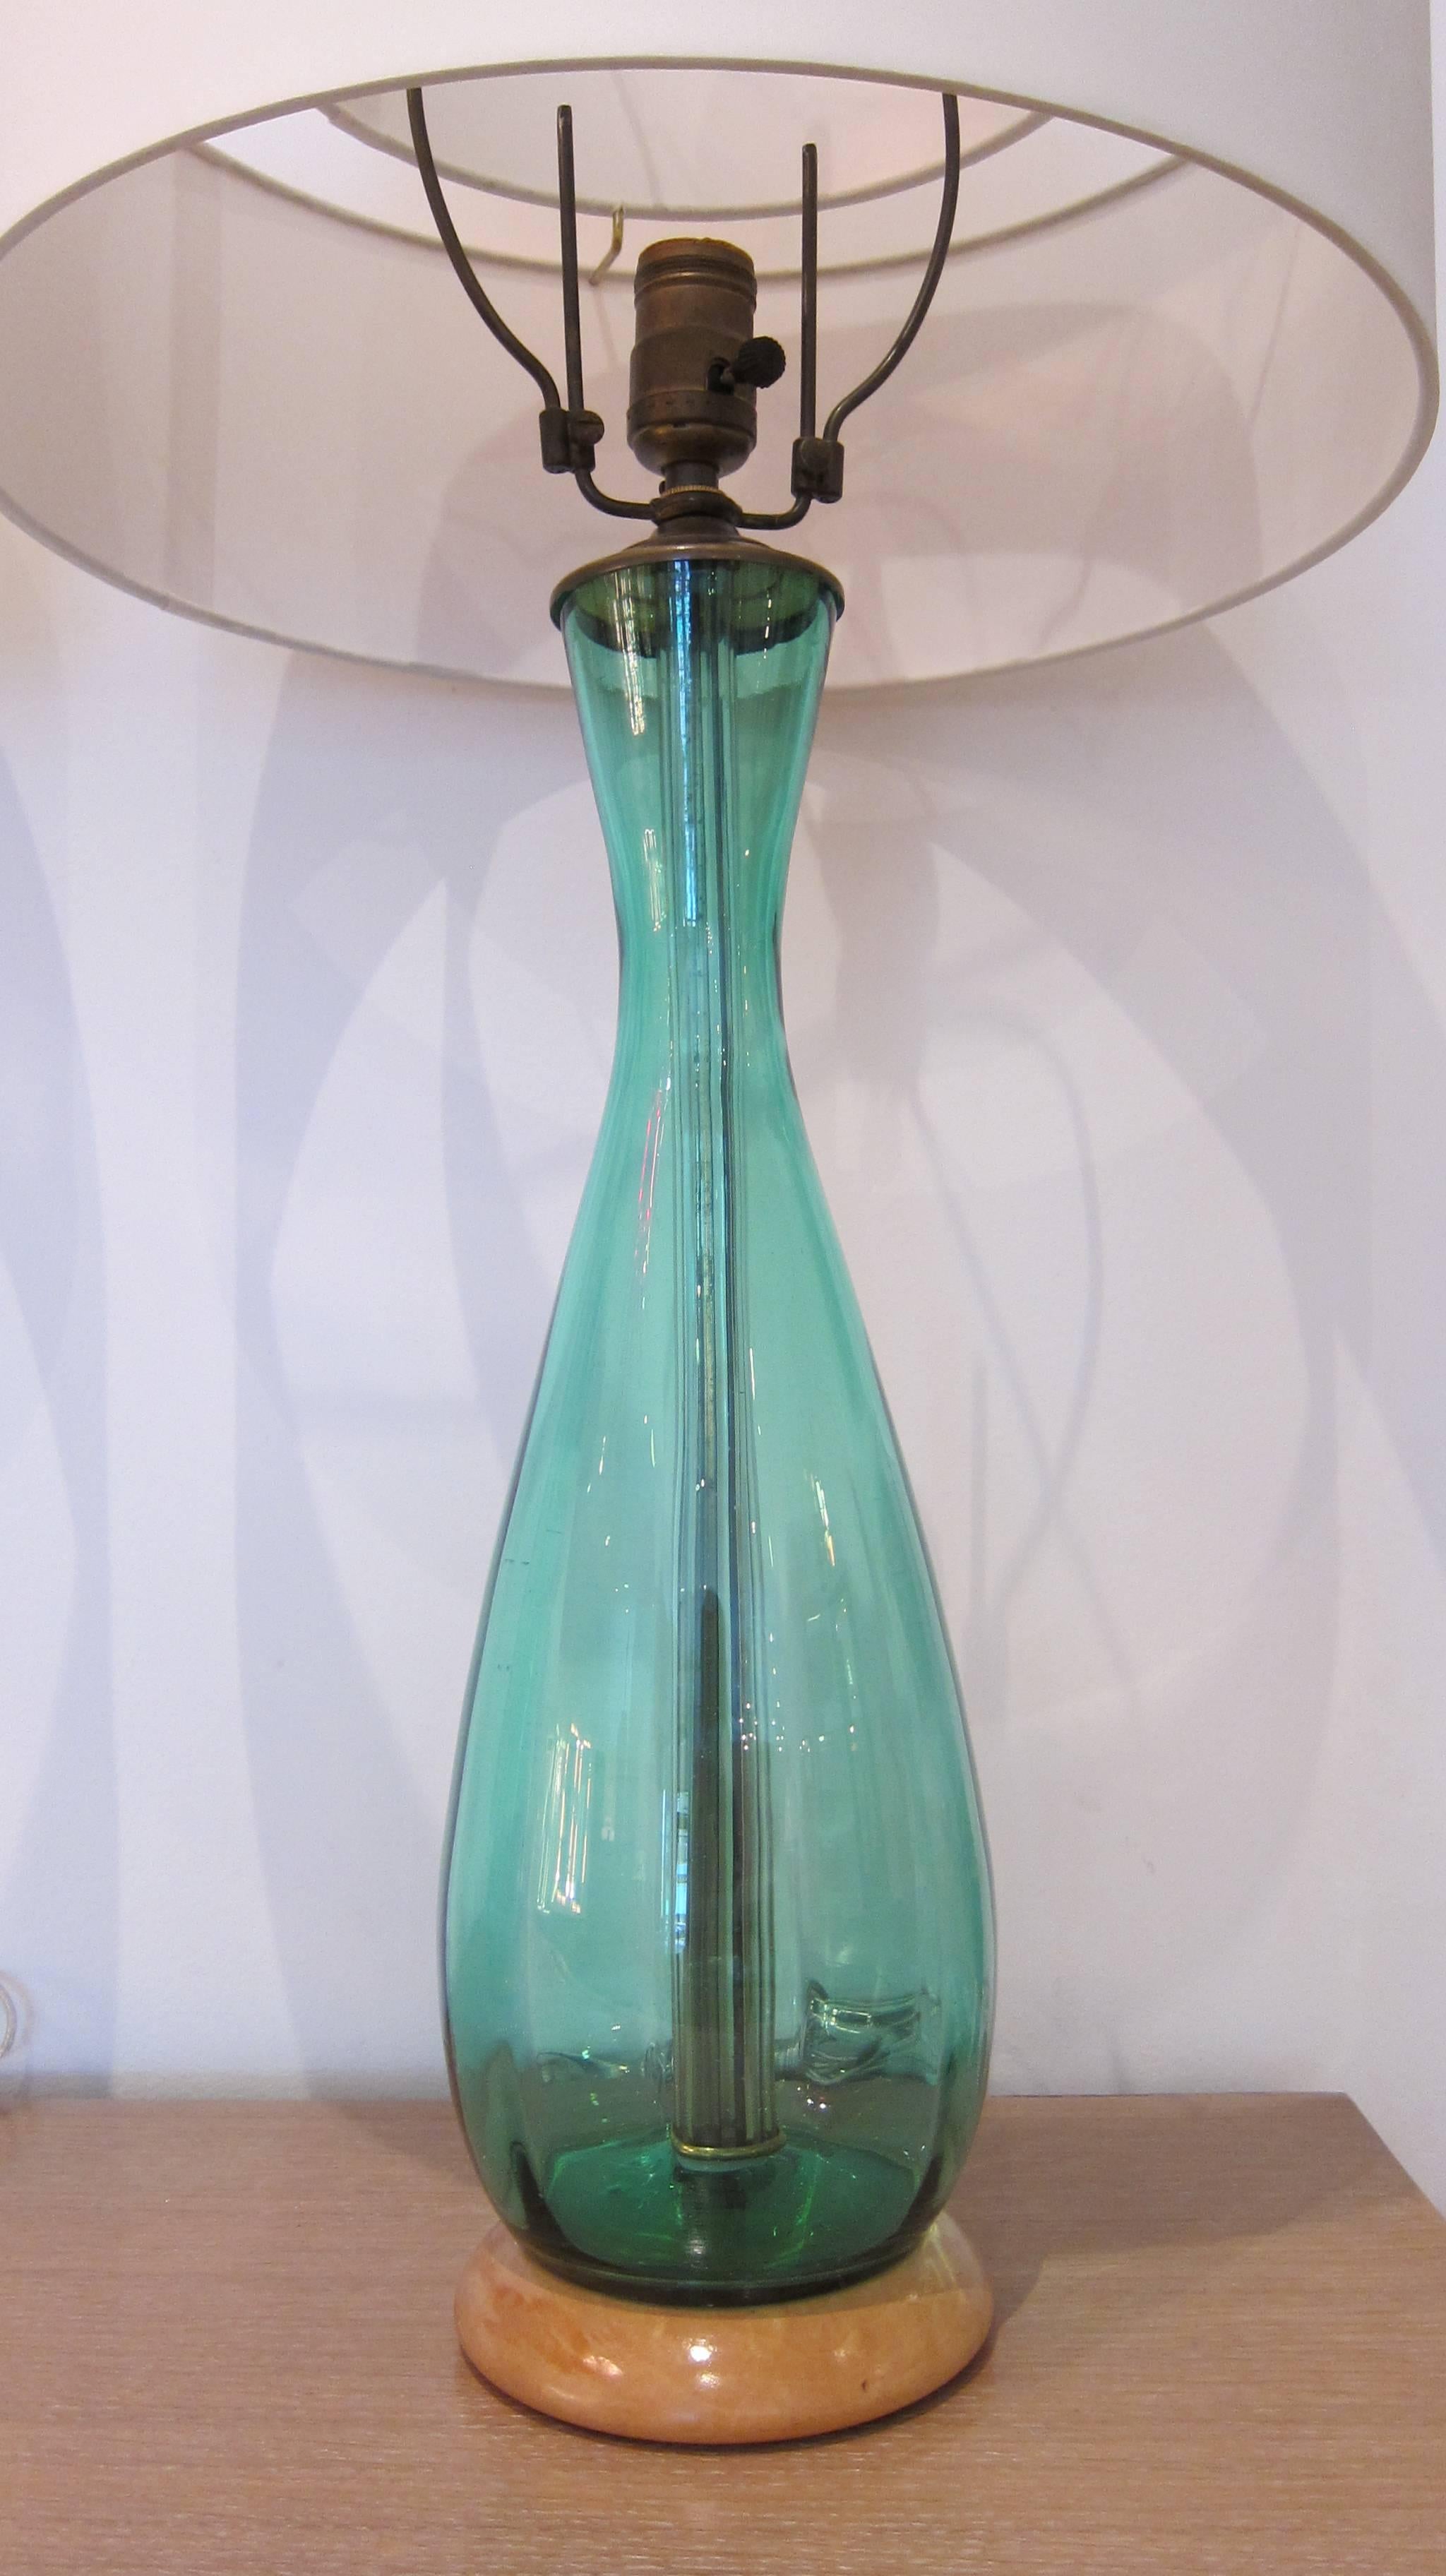 Pair of blue green glass table lamps with matching finials, each of baluster form, raised on a circular wooden base. Height overall 33 inches. Comes with custom made shades.